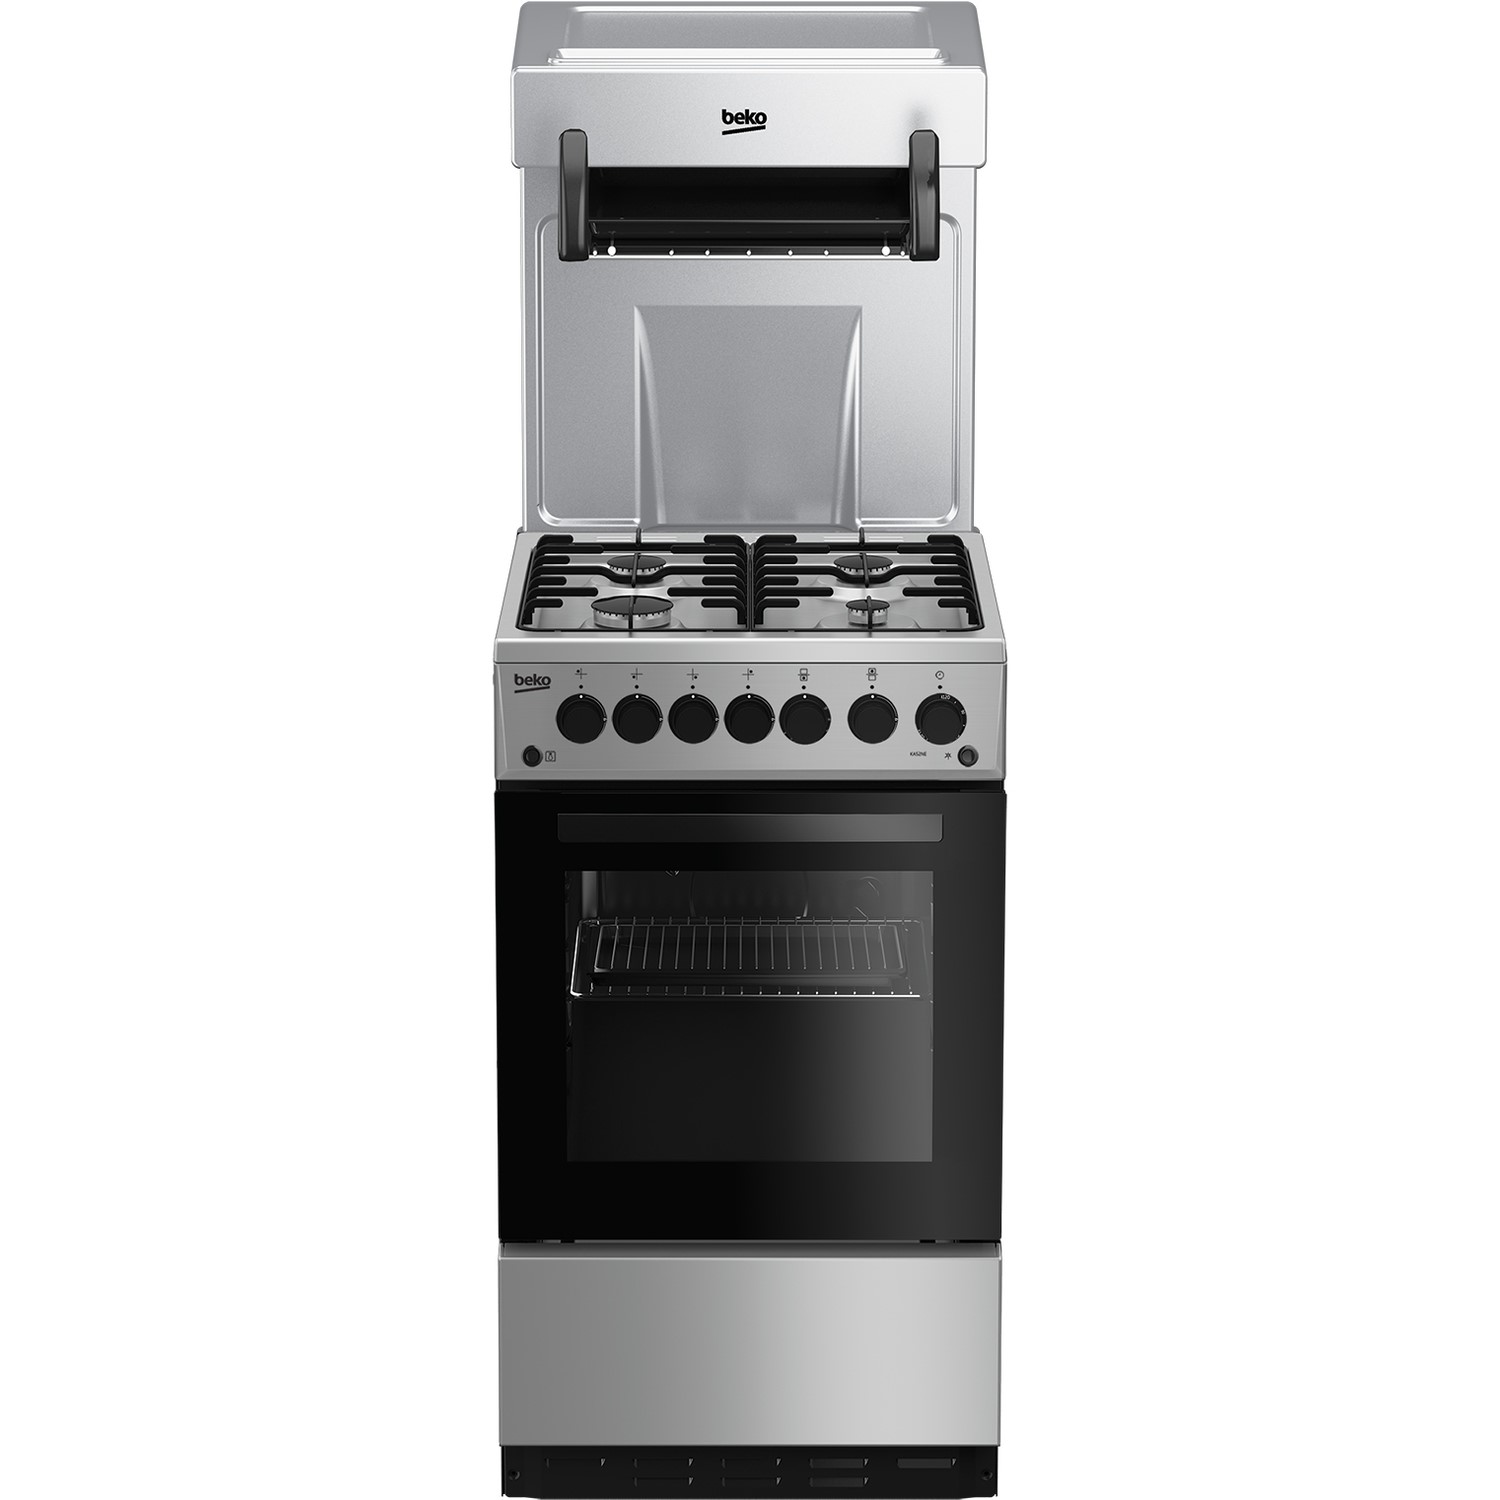 Beko 50cm Gas Cooker with Eye Level Grill - Silver